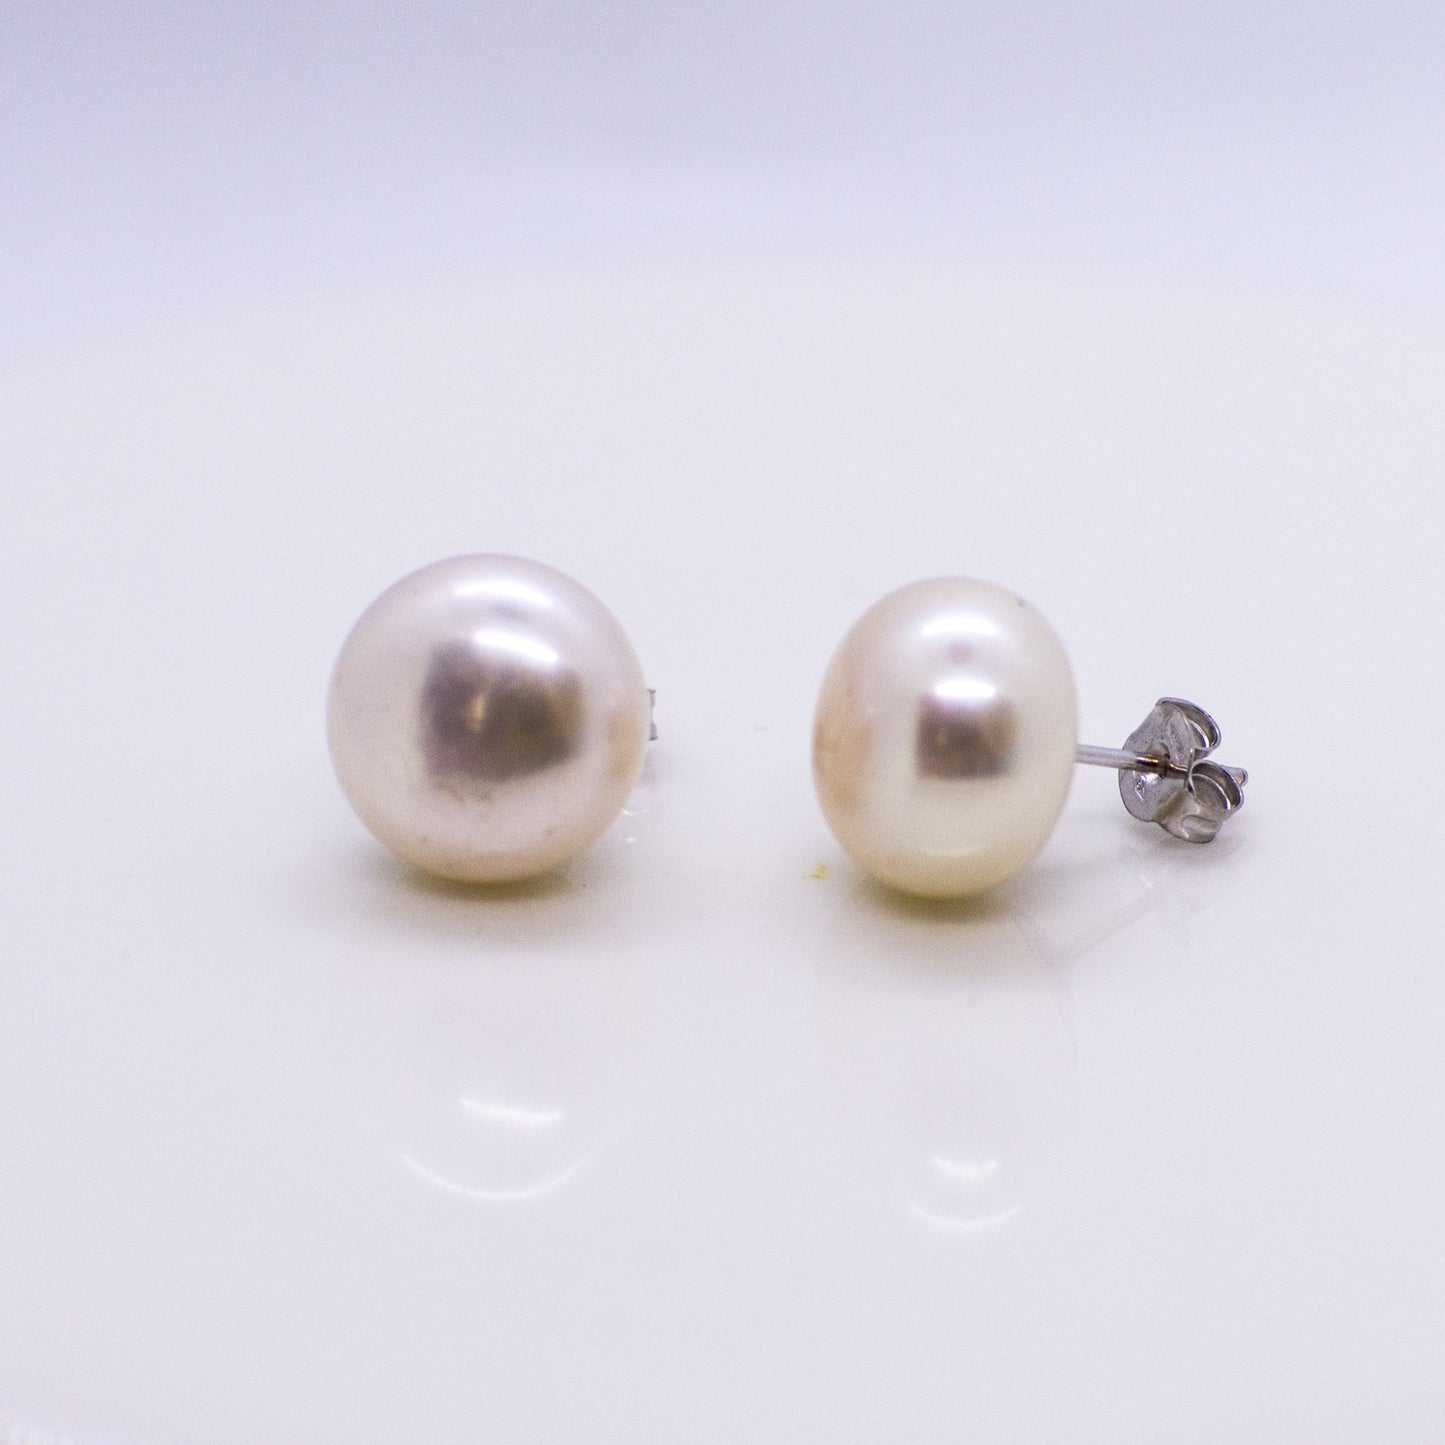 18ct White Gold Pearl Button Stud Earrings 12mm - John Ross Jewellers